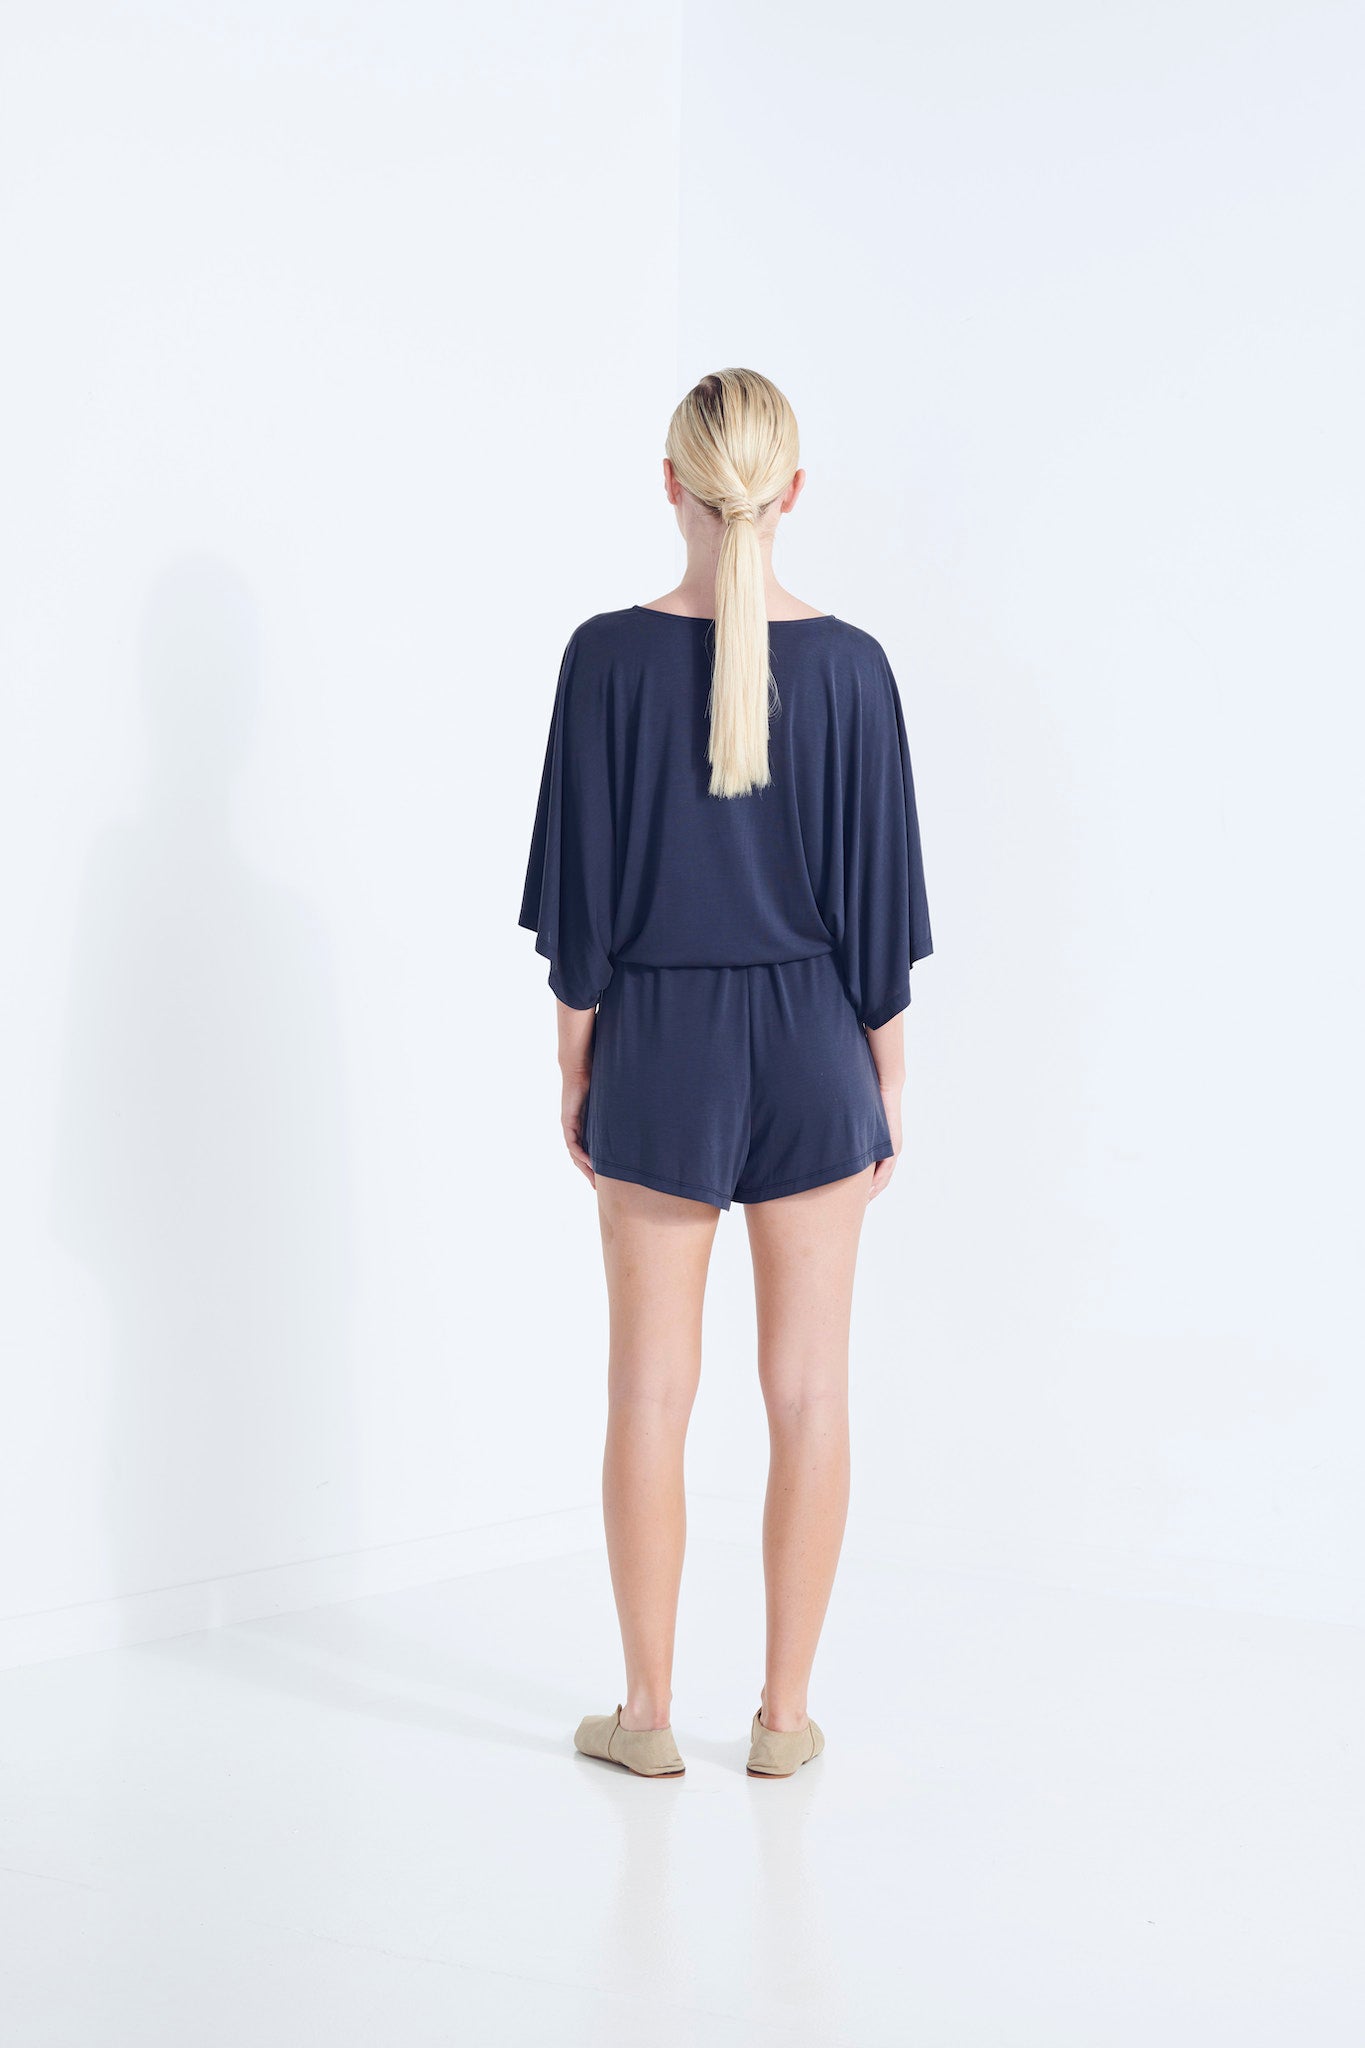 CARRIE PLAYSUIT BEECHWOOD MODAL STRETCH ROMPER  WITH WRAP FRONT TIE WAIST AND POCKETS IN AEGEAN WASHED NAVY  BACK VIEW